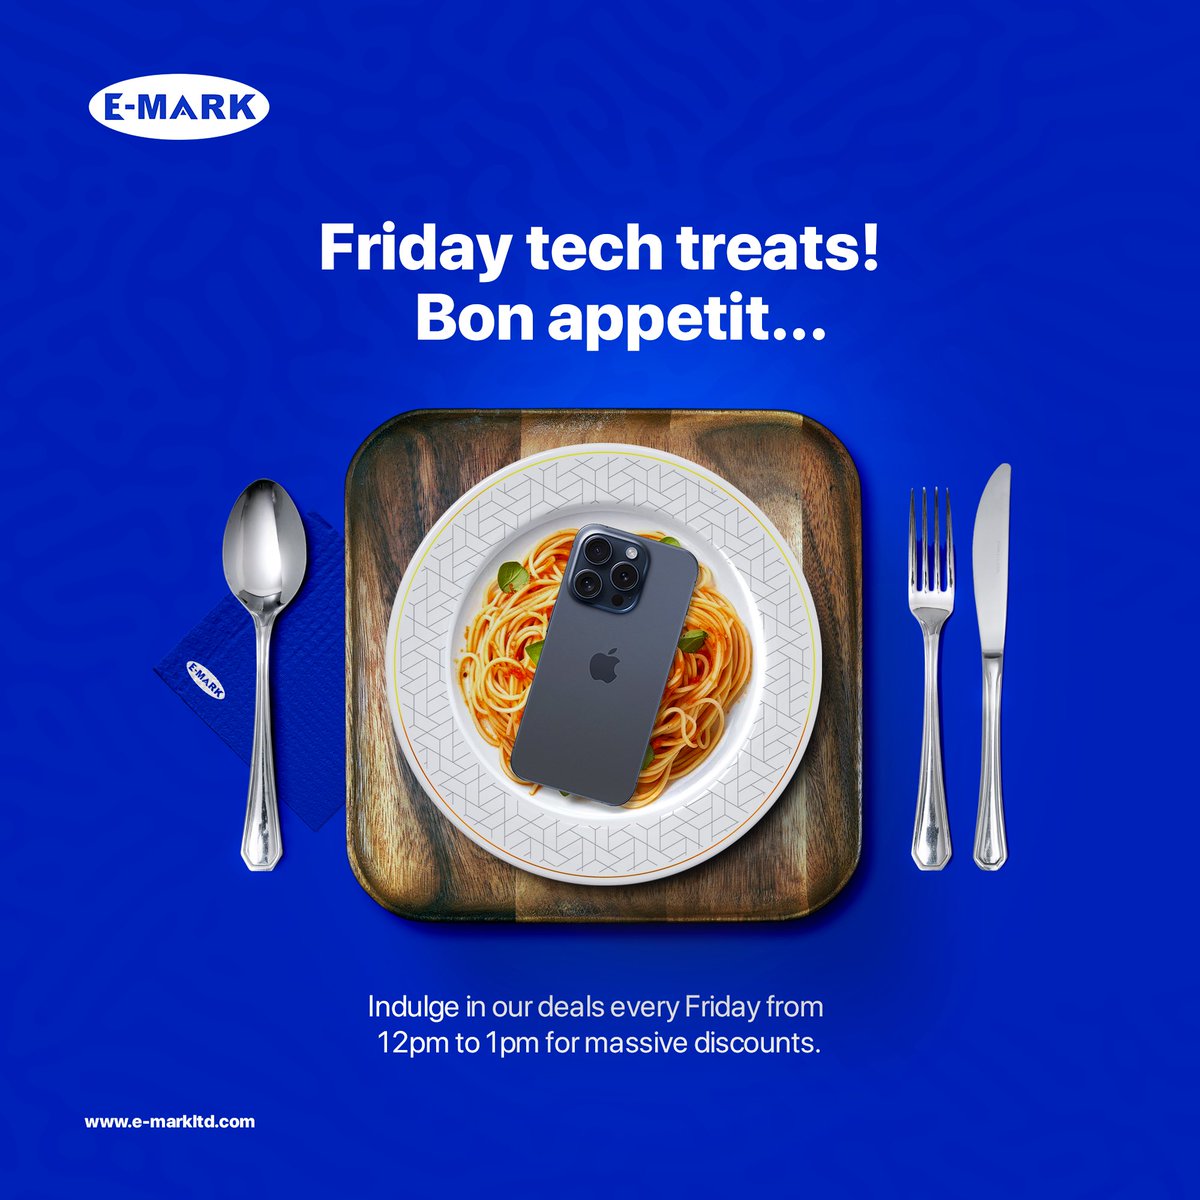 Come and indulge in our variety of great deals on your favorite devices. Swing by for a date to kick off your weekend tech ready. #Techtreats #HappyHour #ConnectingPeople